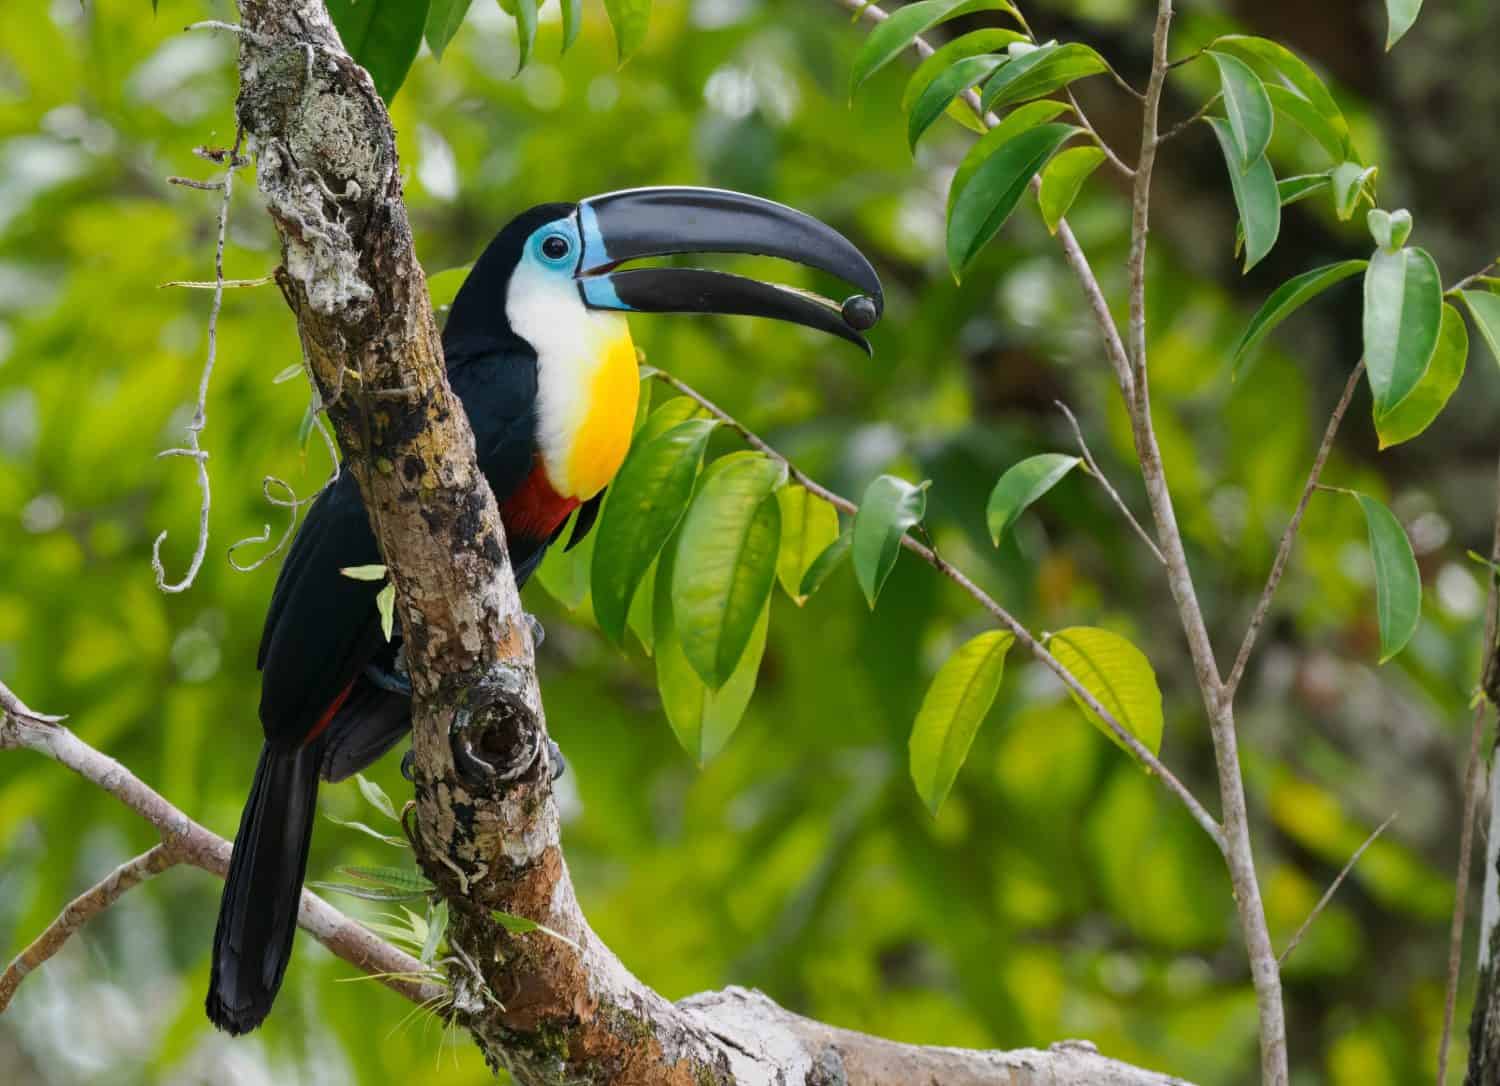 Channel-billed toucan perched on branch in jungle